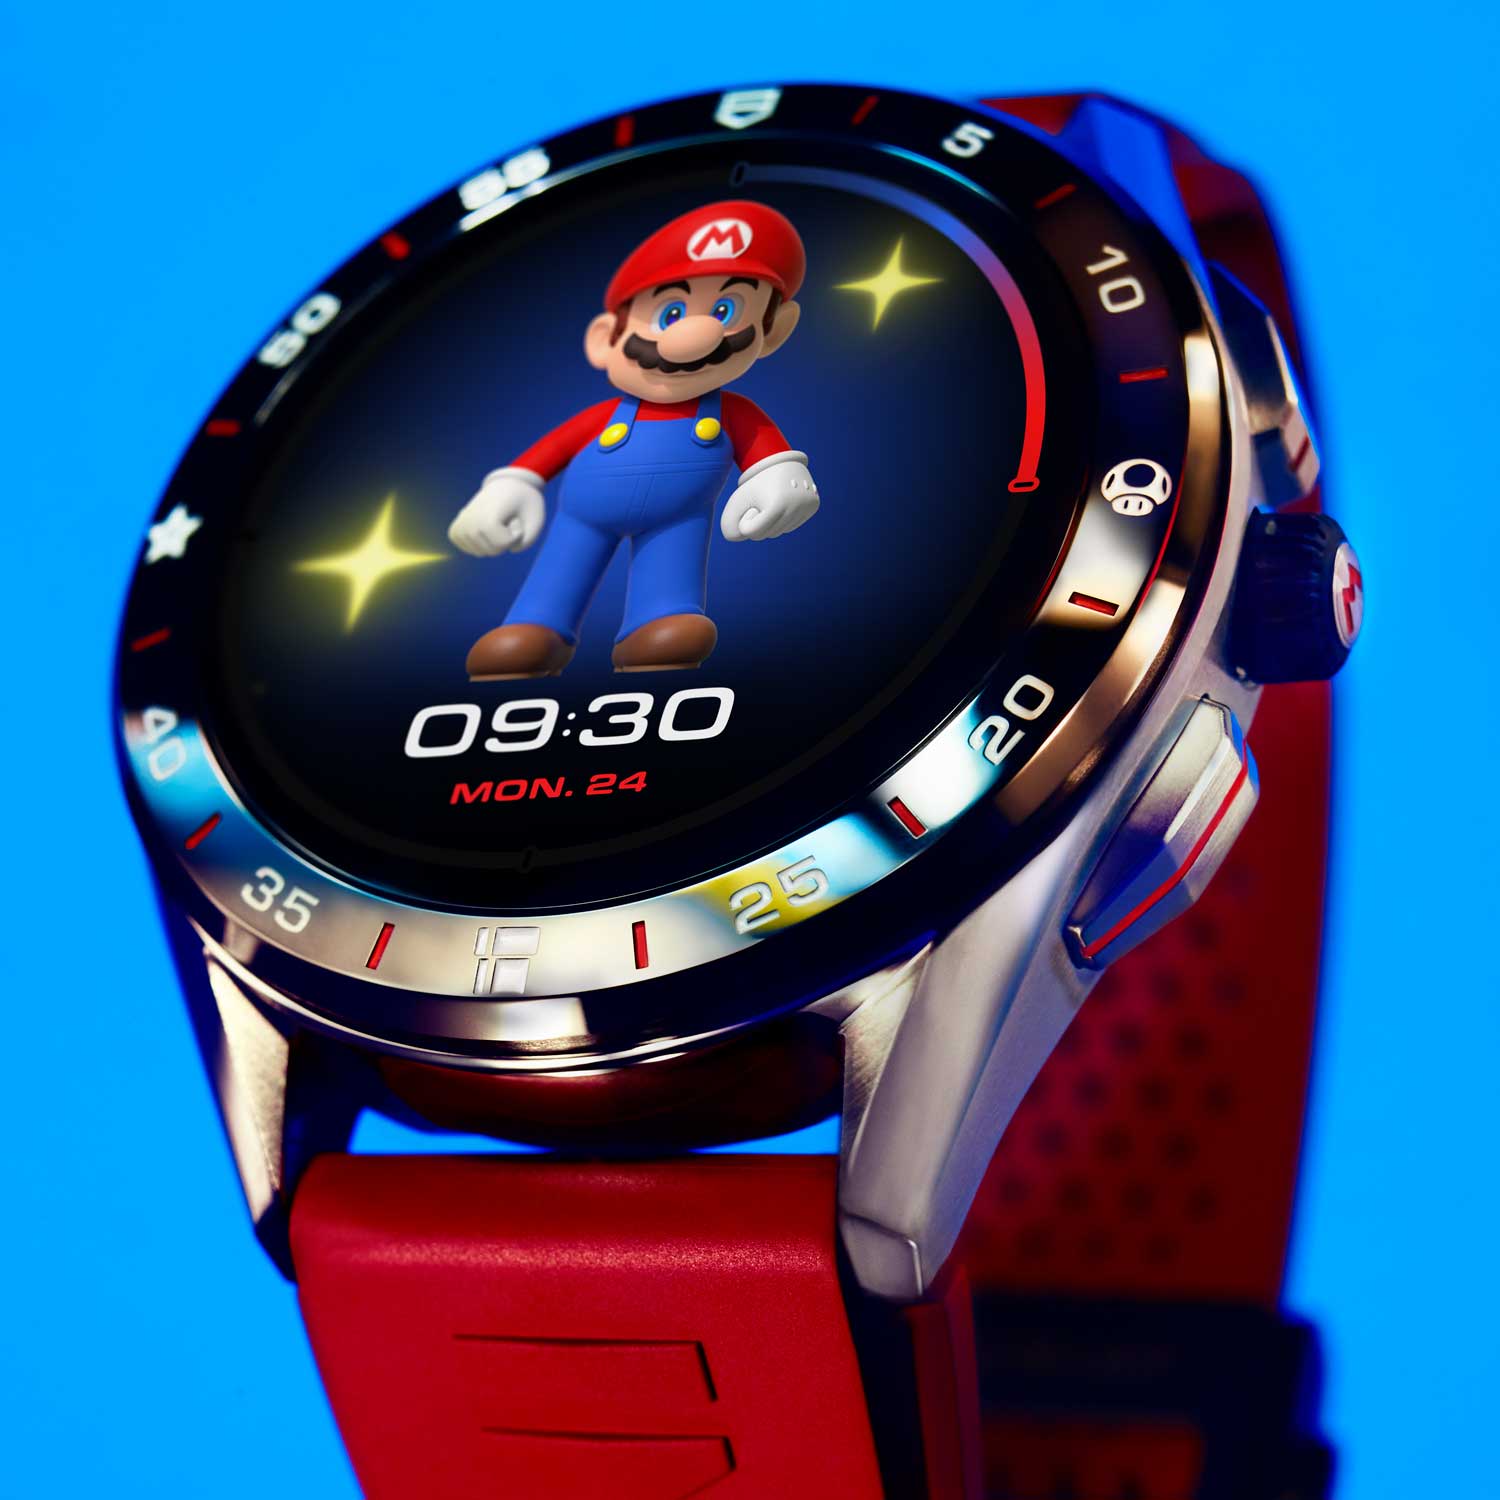 The watch’s bezel displays Super Mario’s famous objects - at 3 o’clock is the Super Mushroom that makes Mario grow, at 6 o’clock is the Pipe that allows him to travel fast and at 9 o’clock is the Super Star that makes him invincible.